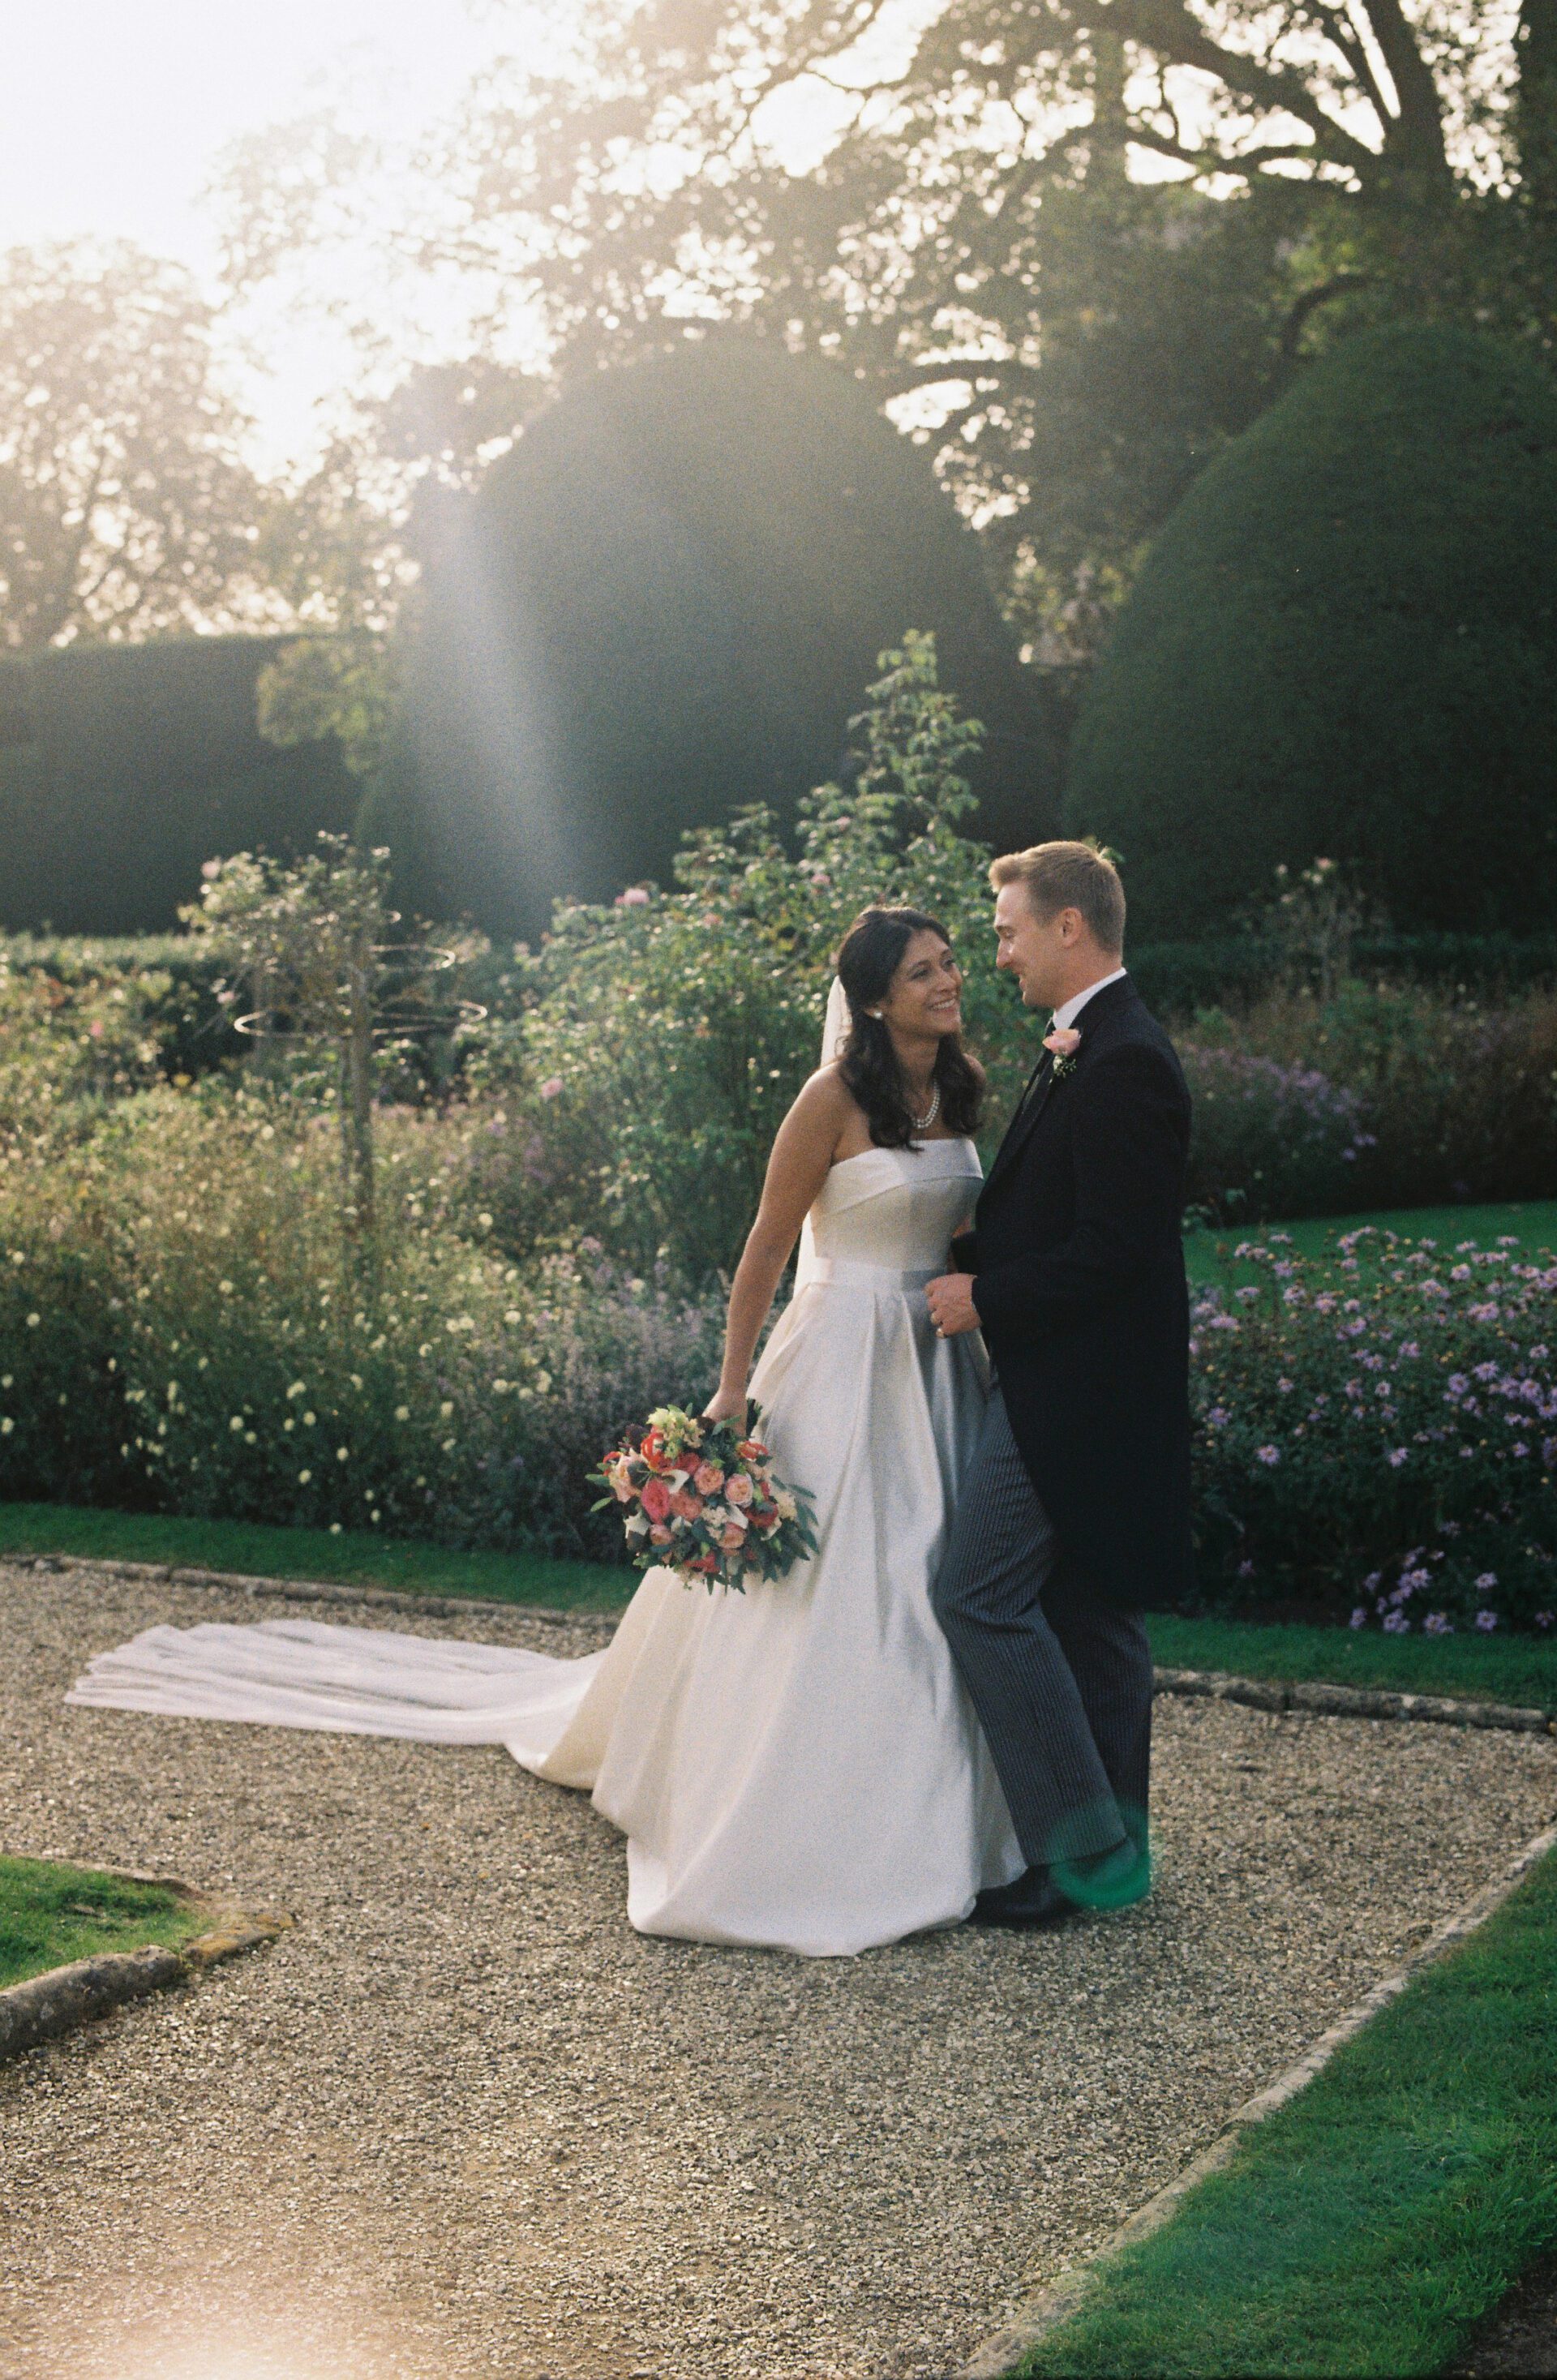 35mm film wedding photography couple portrait in the Cotswolds